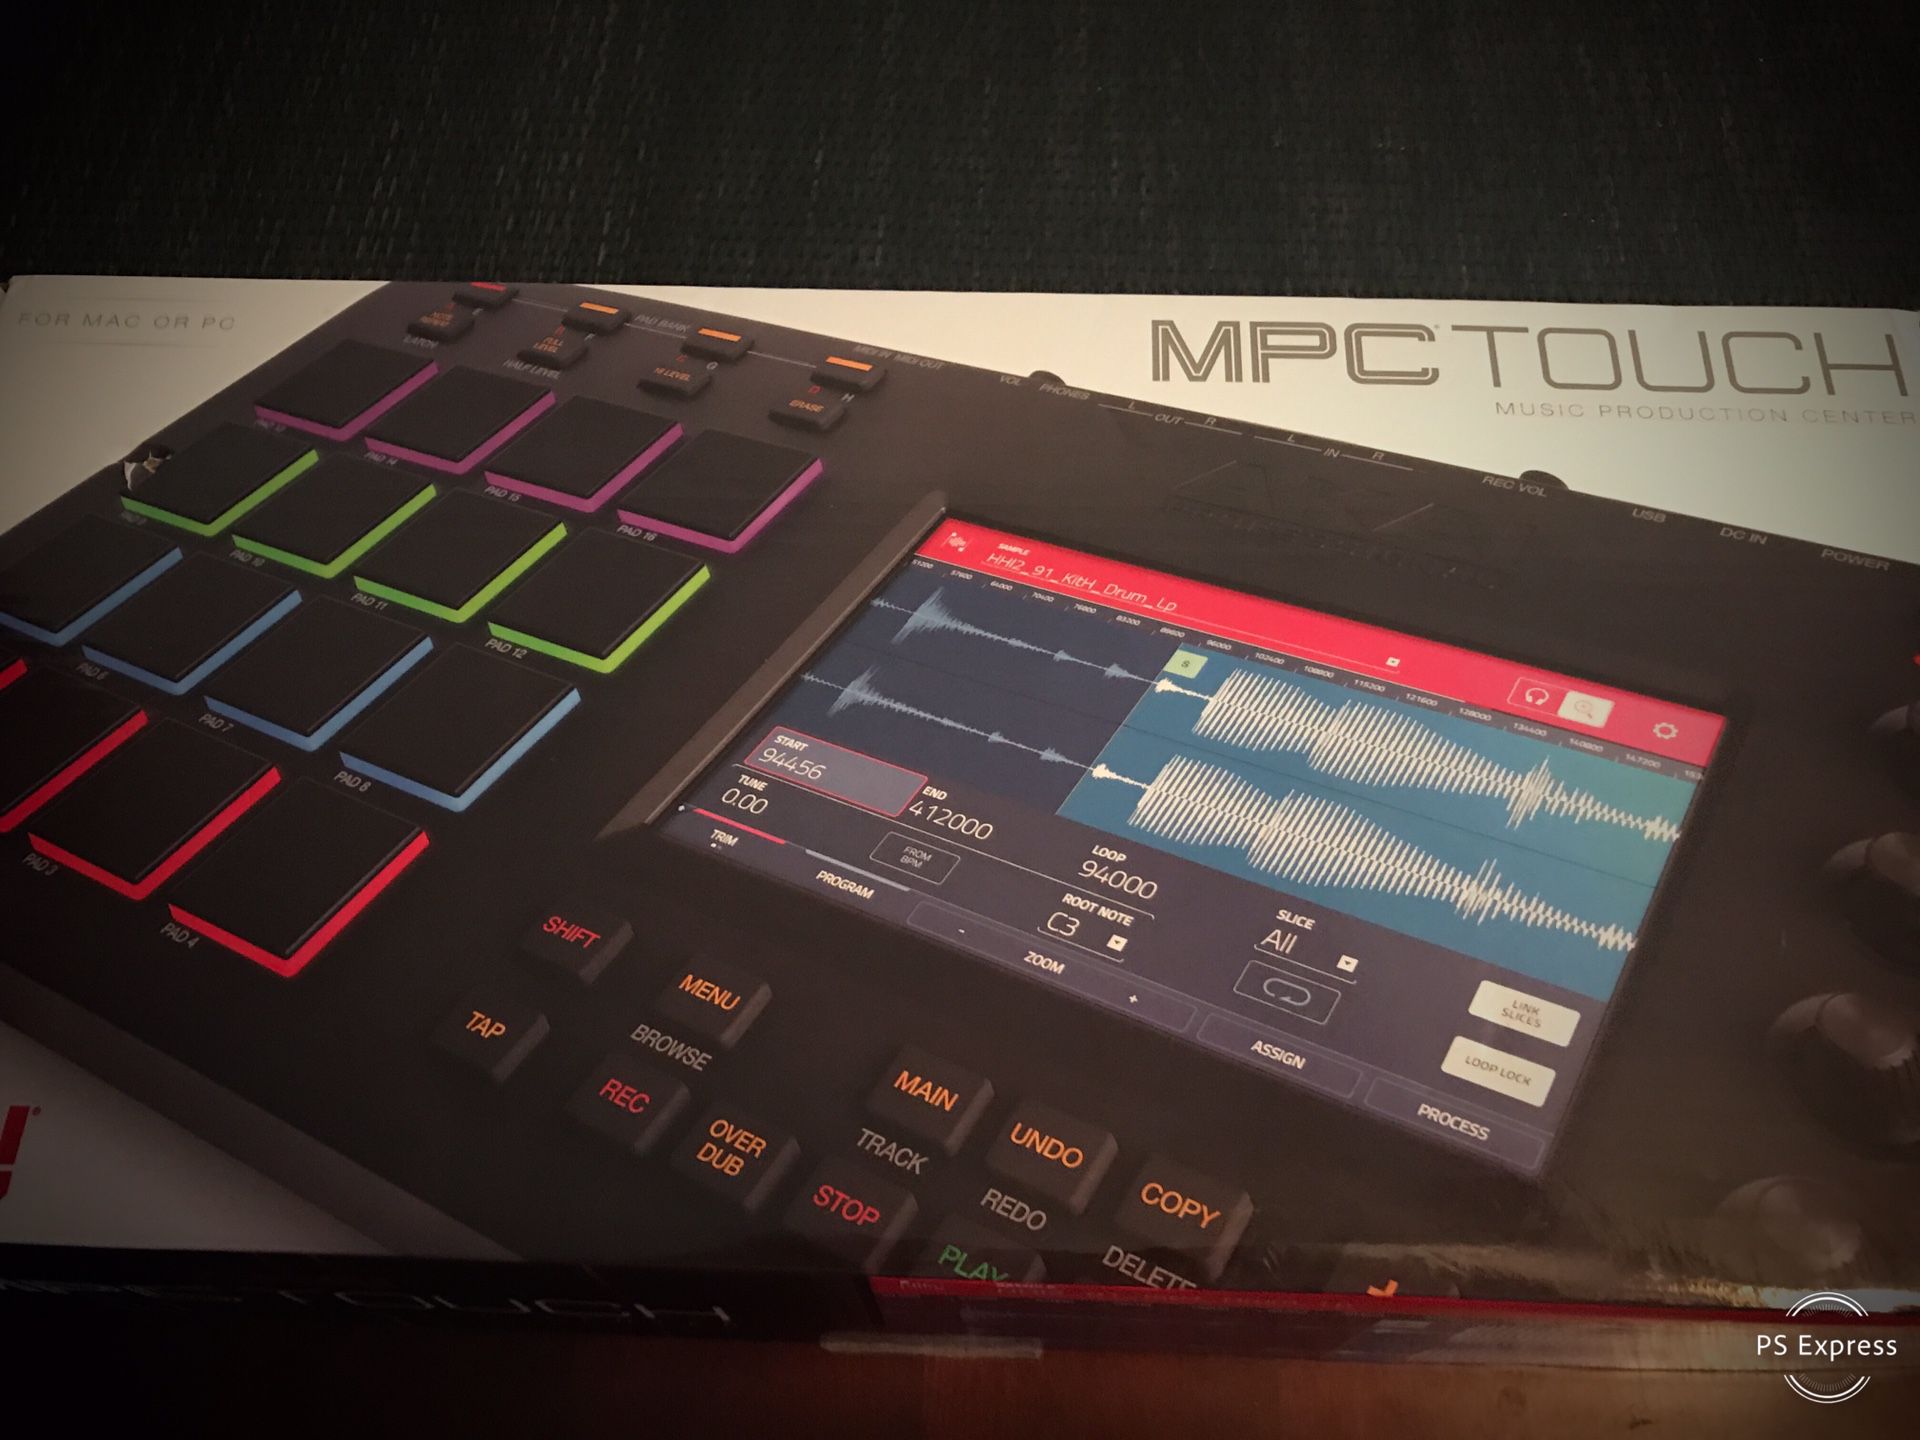 Akai MPC Touch with MPC 2.7 software